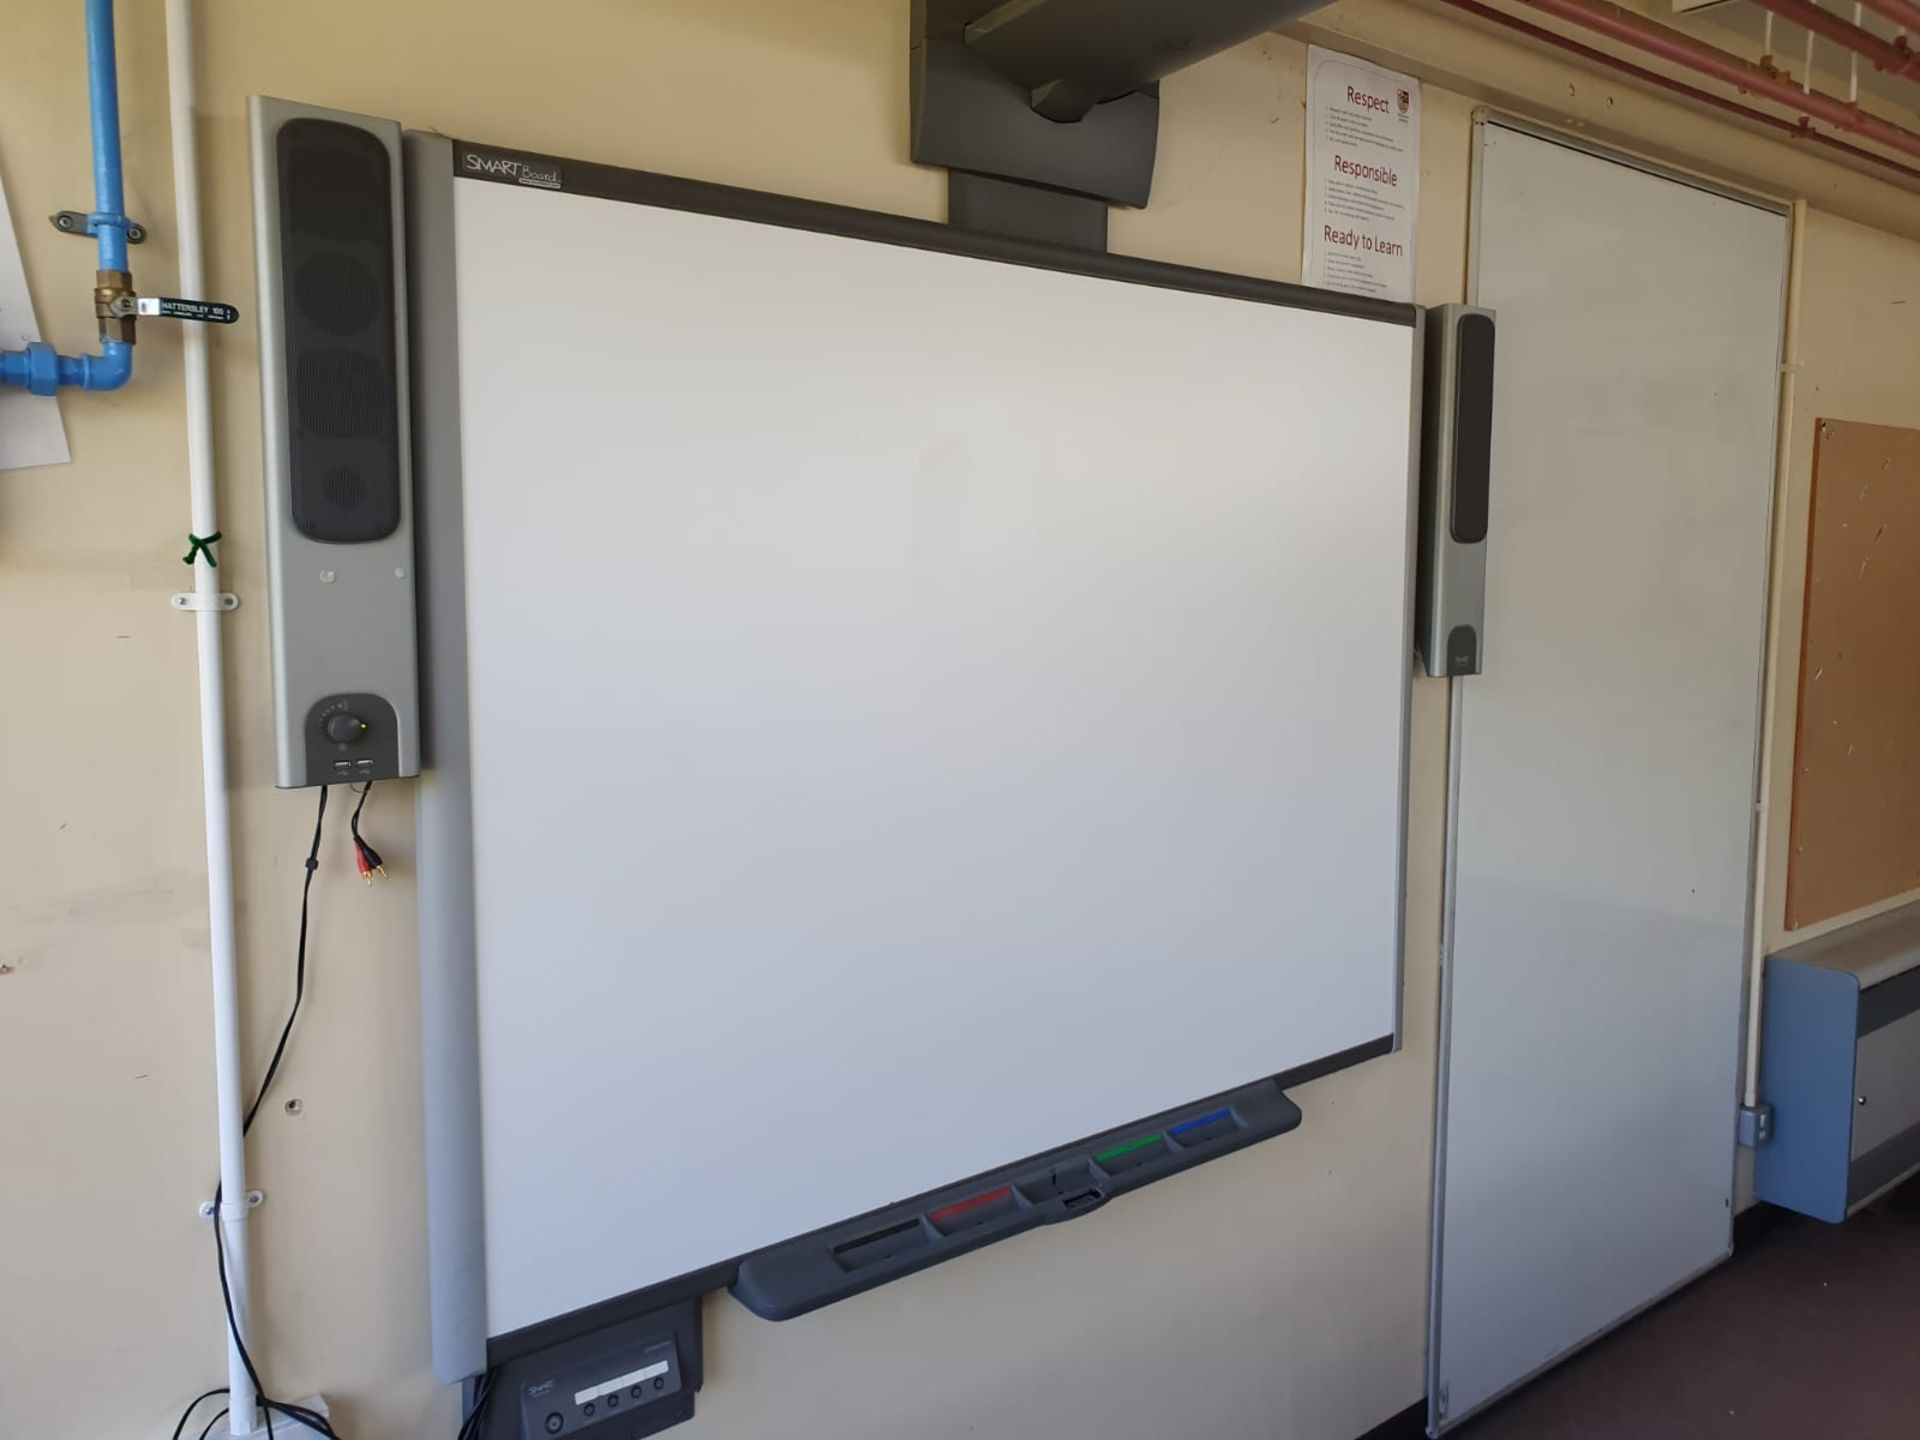 1 x Smart Interactive White Board With Projector and Speakers - Large Size -CL499 - Location: - Image 2 of 7